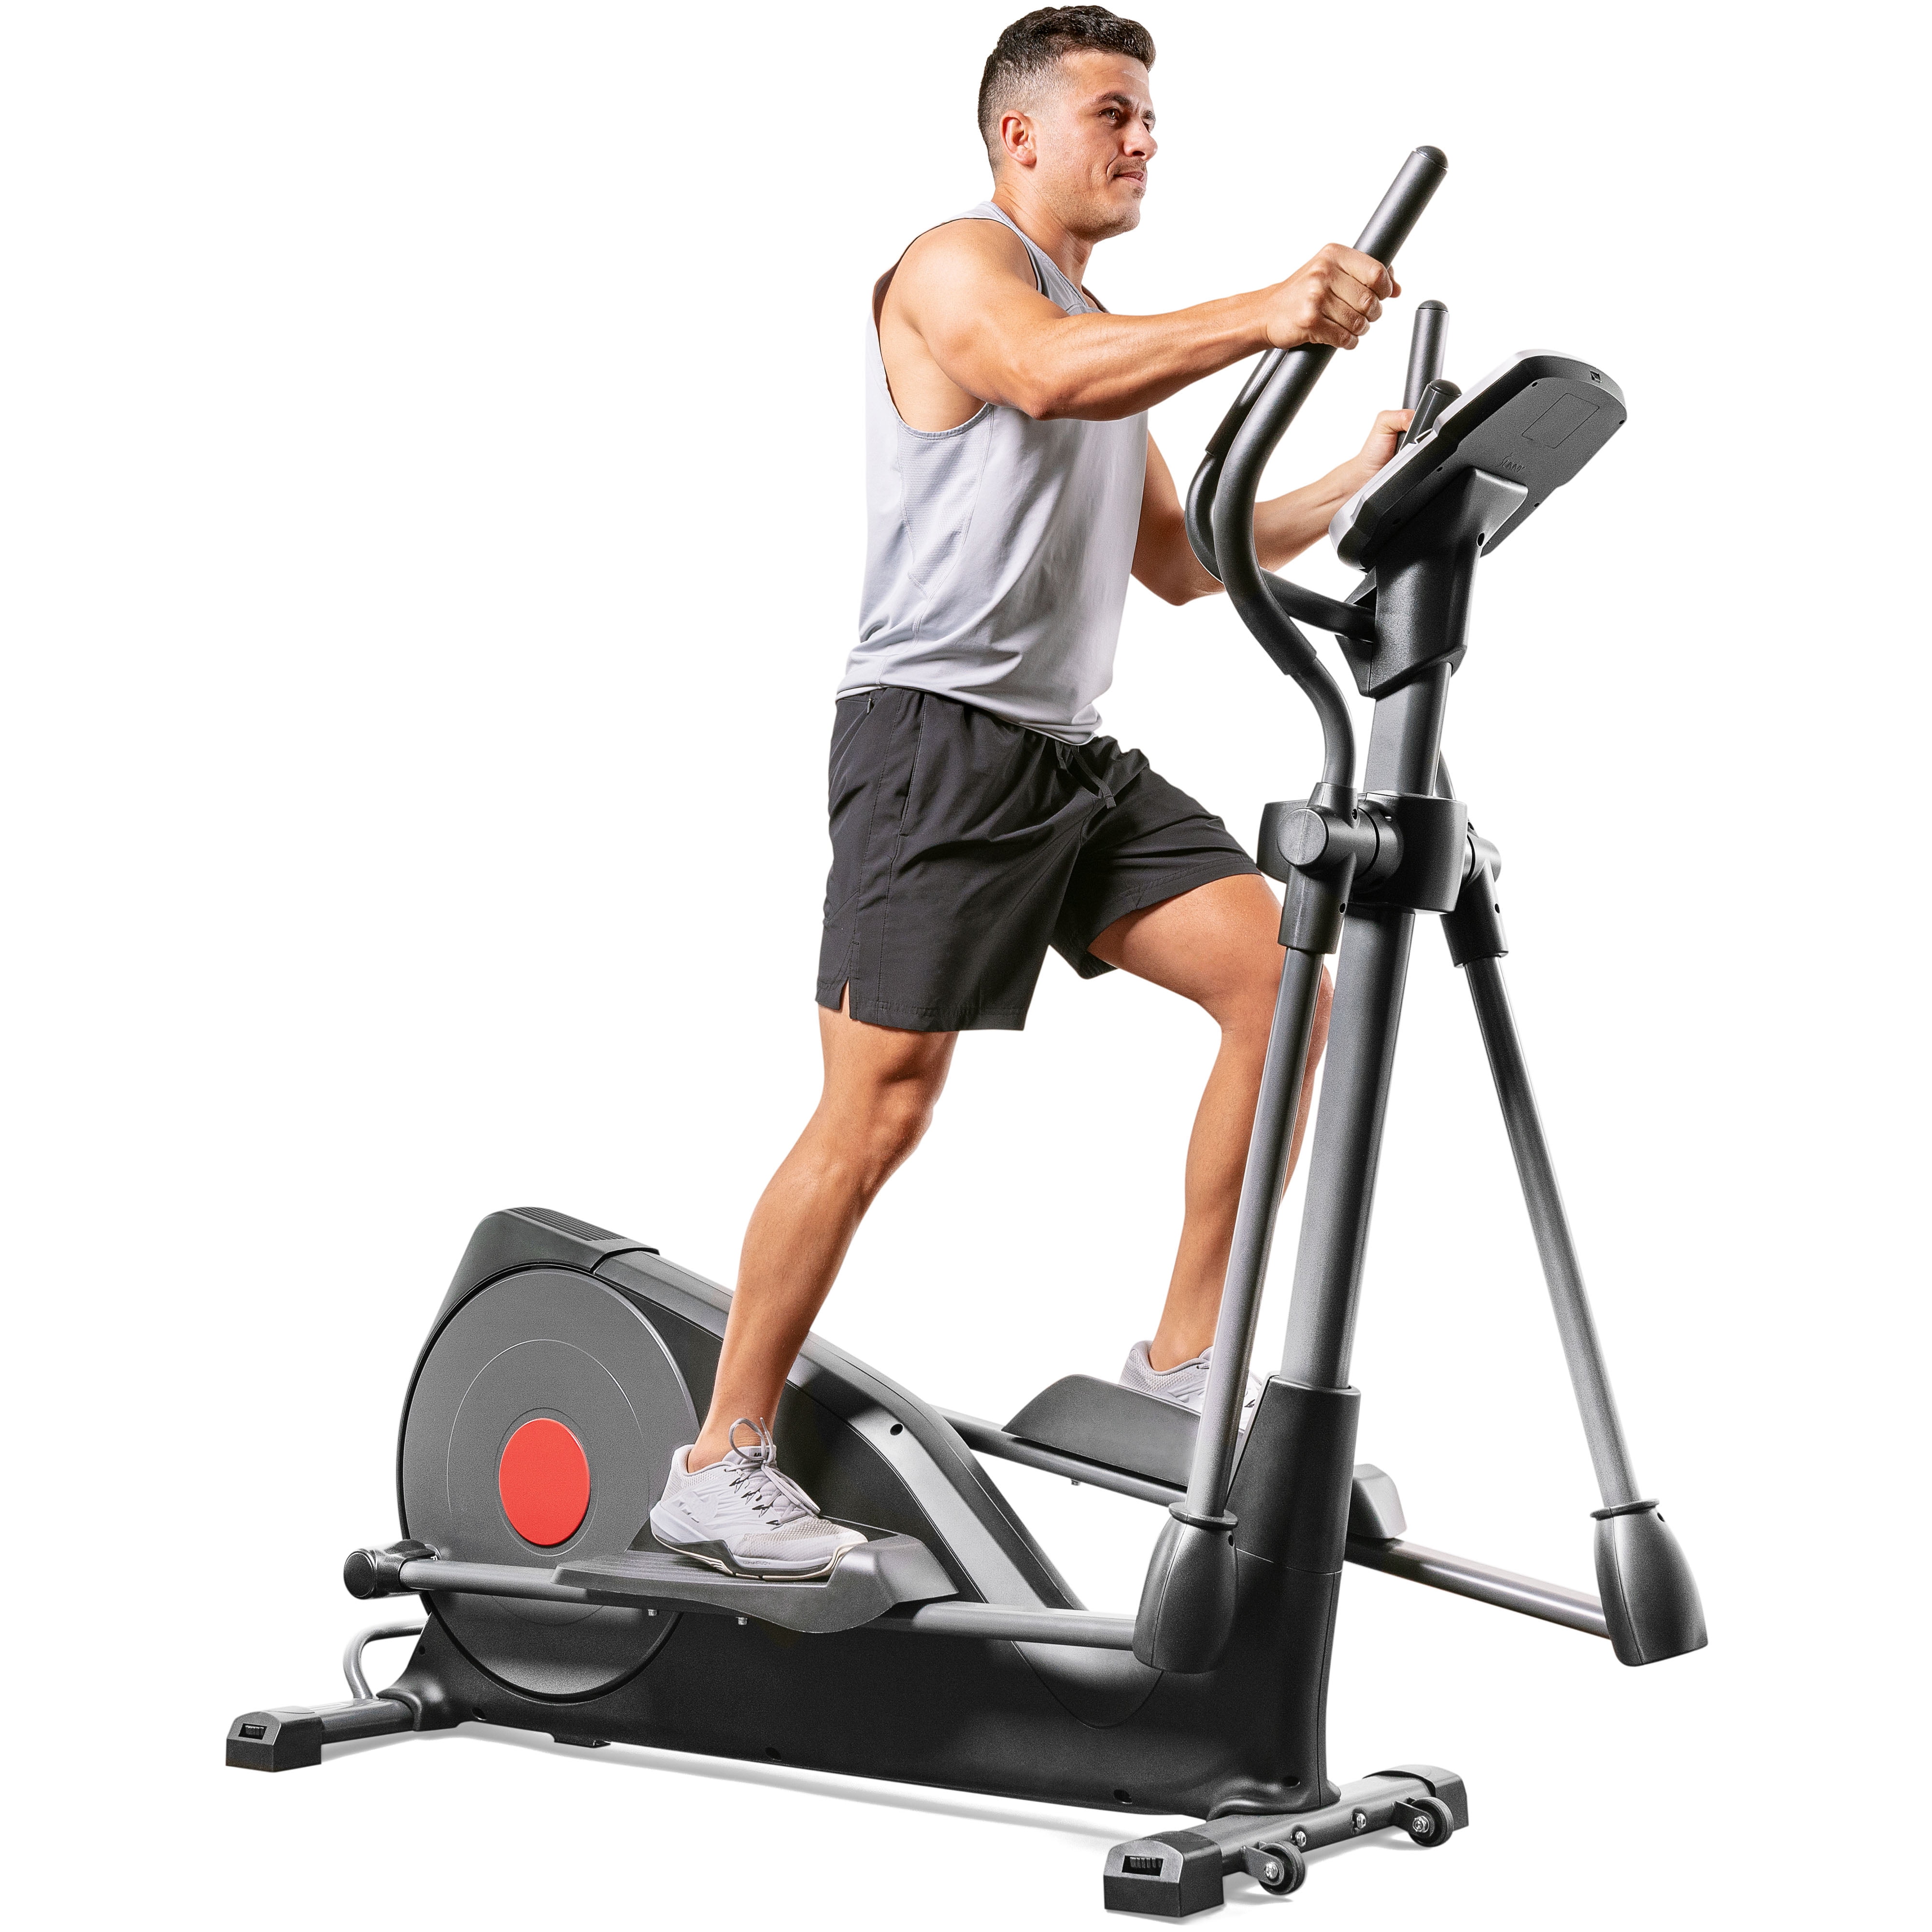 Sunny Health & Fitness Pre-Programmed Elliptical Trainer Workout Machine - SF-E320001 - image 1 of 8